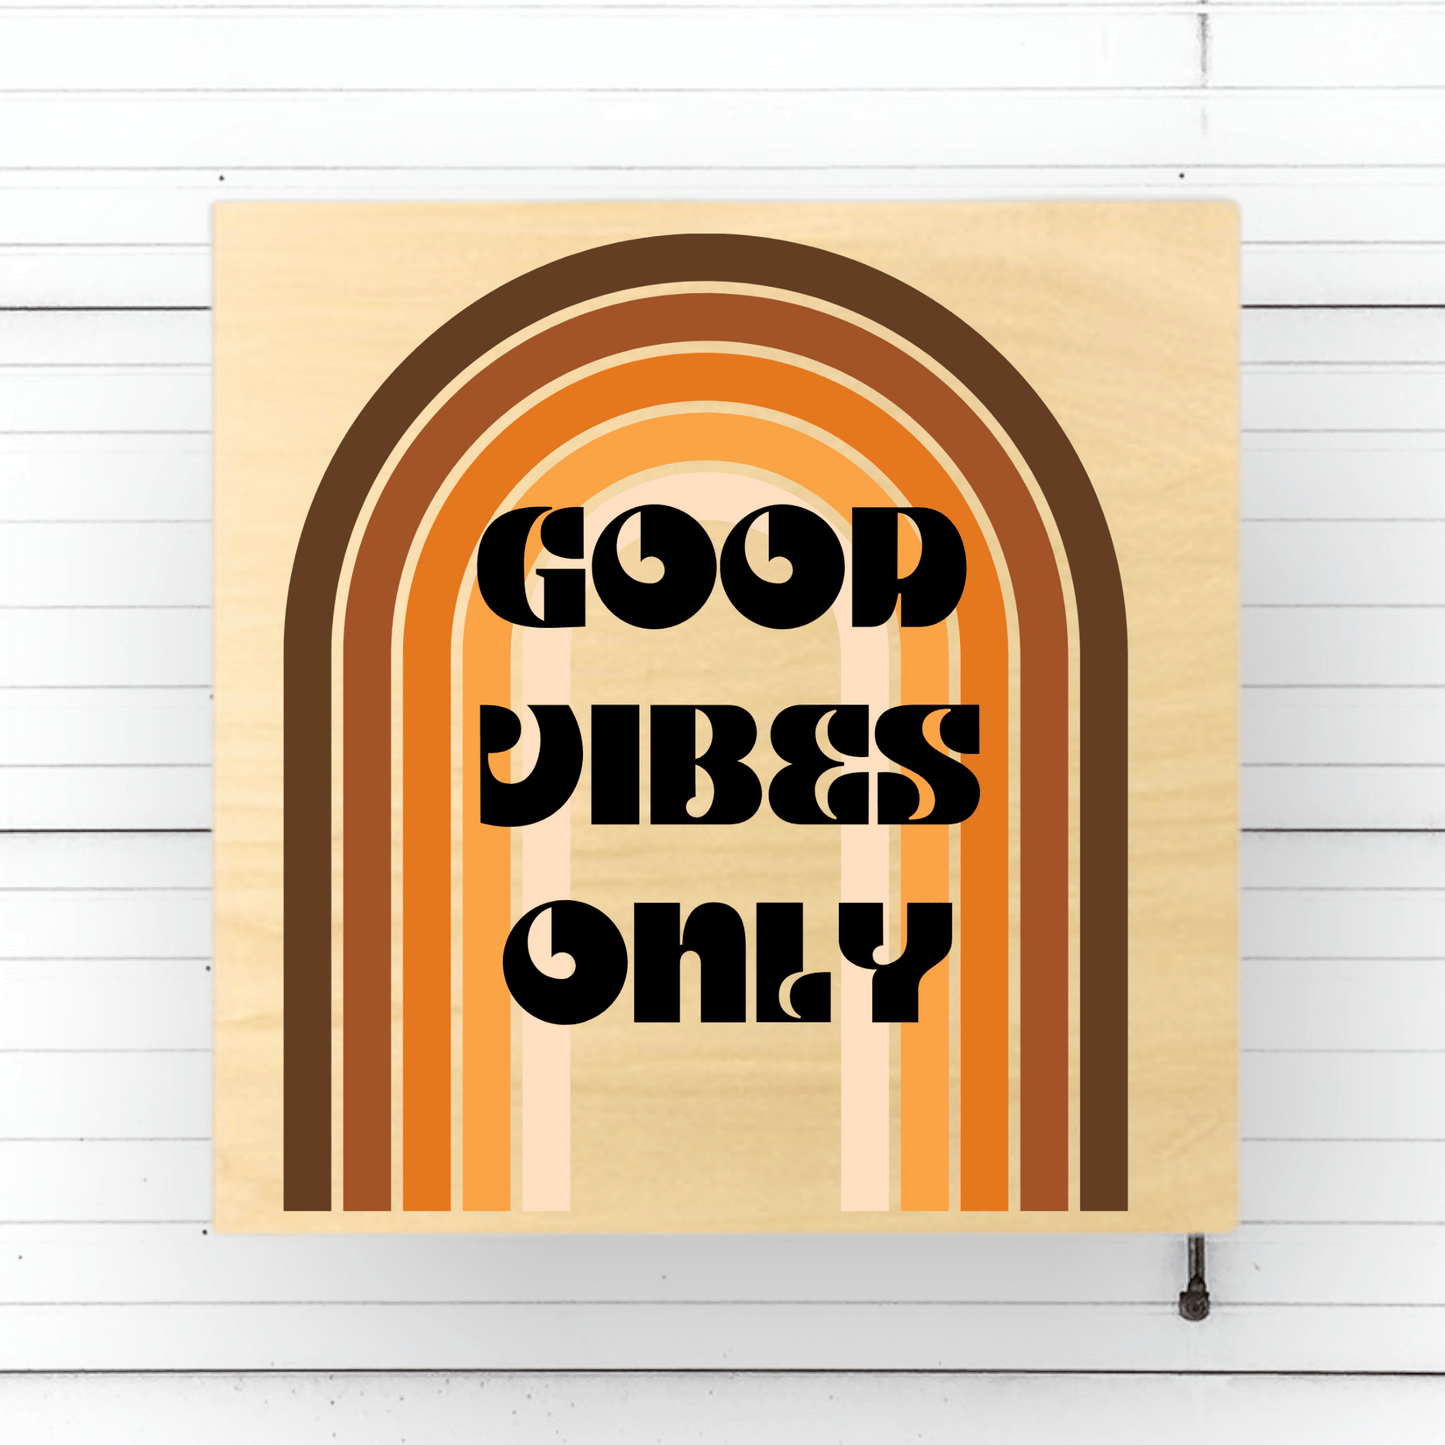 12" Square Wood Retro Good Vibes Sign - Vintage-Inspired Wall Decor